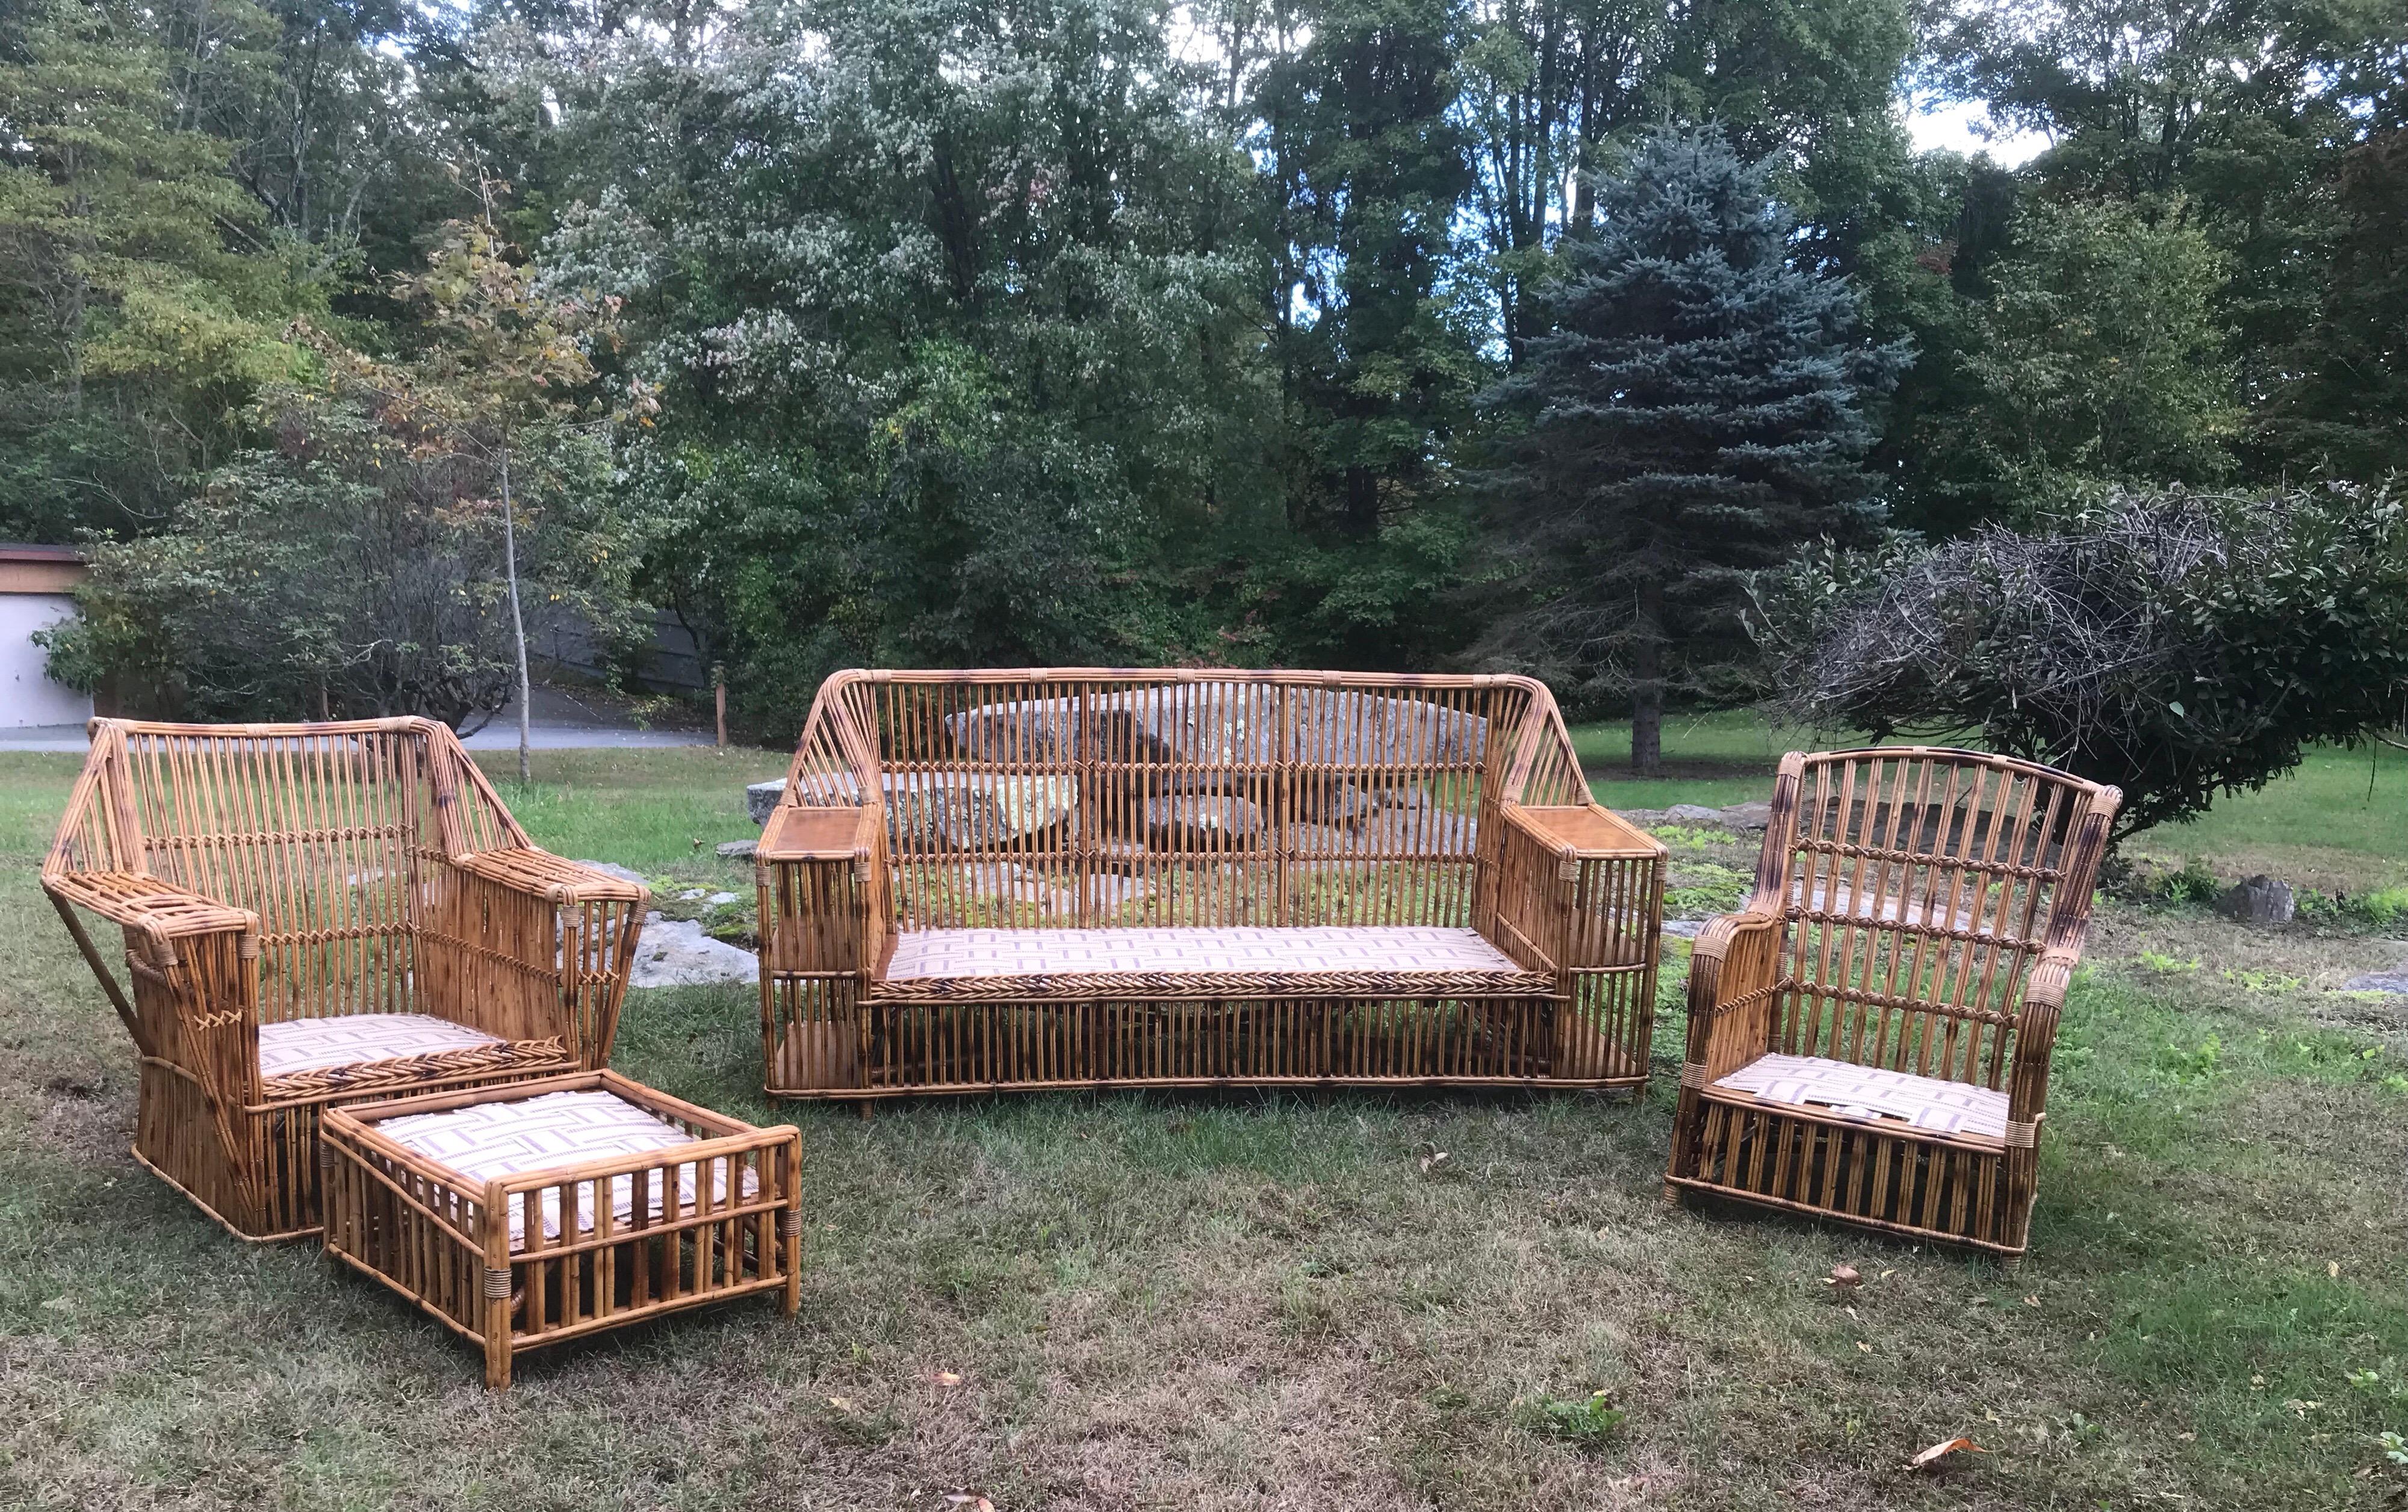 Antique stick rattan set in a natural finish. Restored to original condition. Clean and strong pieces. Sofa measures: 78